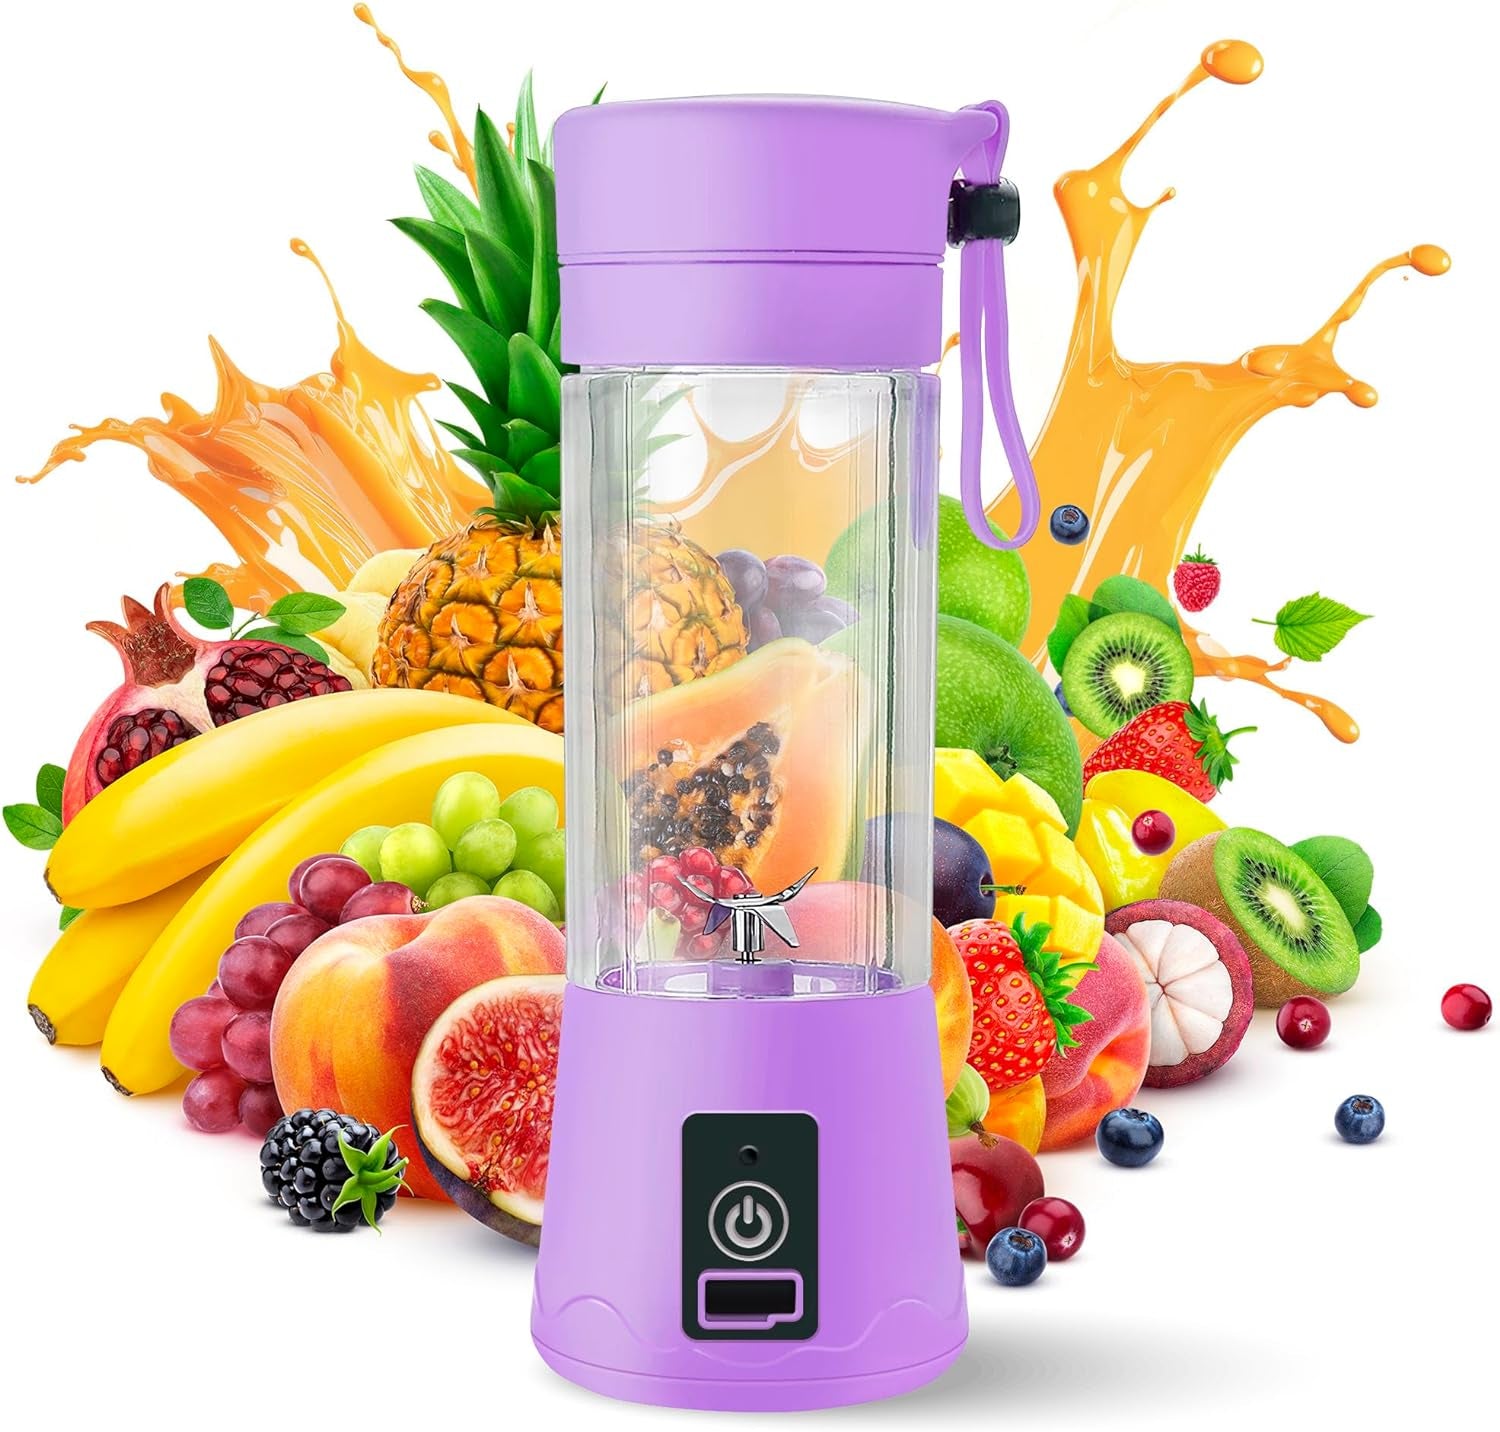 Portable Blender - Compact and USB Rechargeable Personal Travel Blenders for Smoothies, Shakes and Ice - Mini Fruit Juice Mixing Shaker Bottle - 380Ml, Purple  Nomadic Outpost Purple  